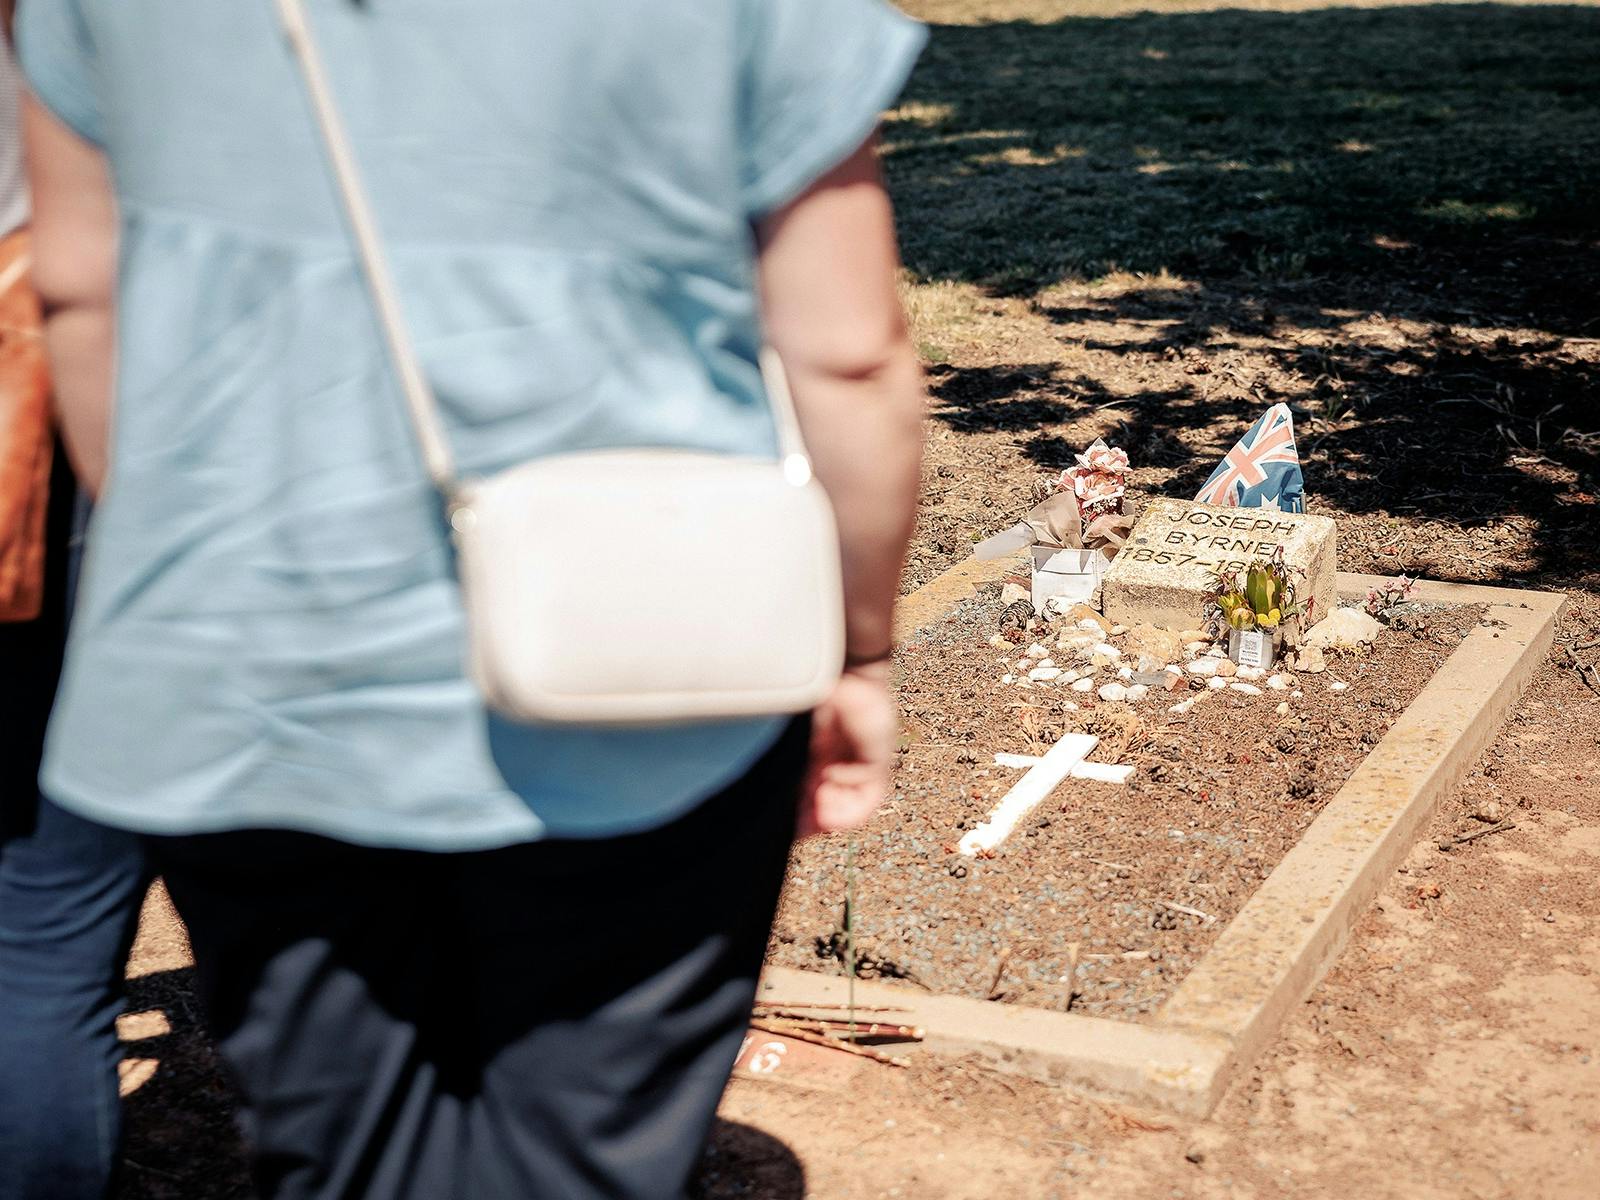 The grave of Joe Byrne can be located at the Benalla Cemetery.